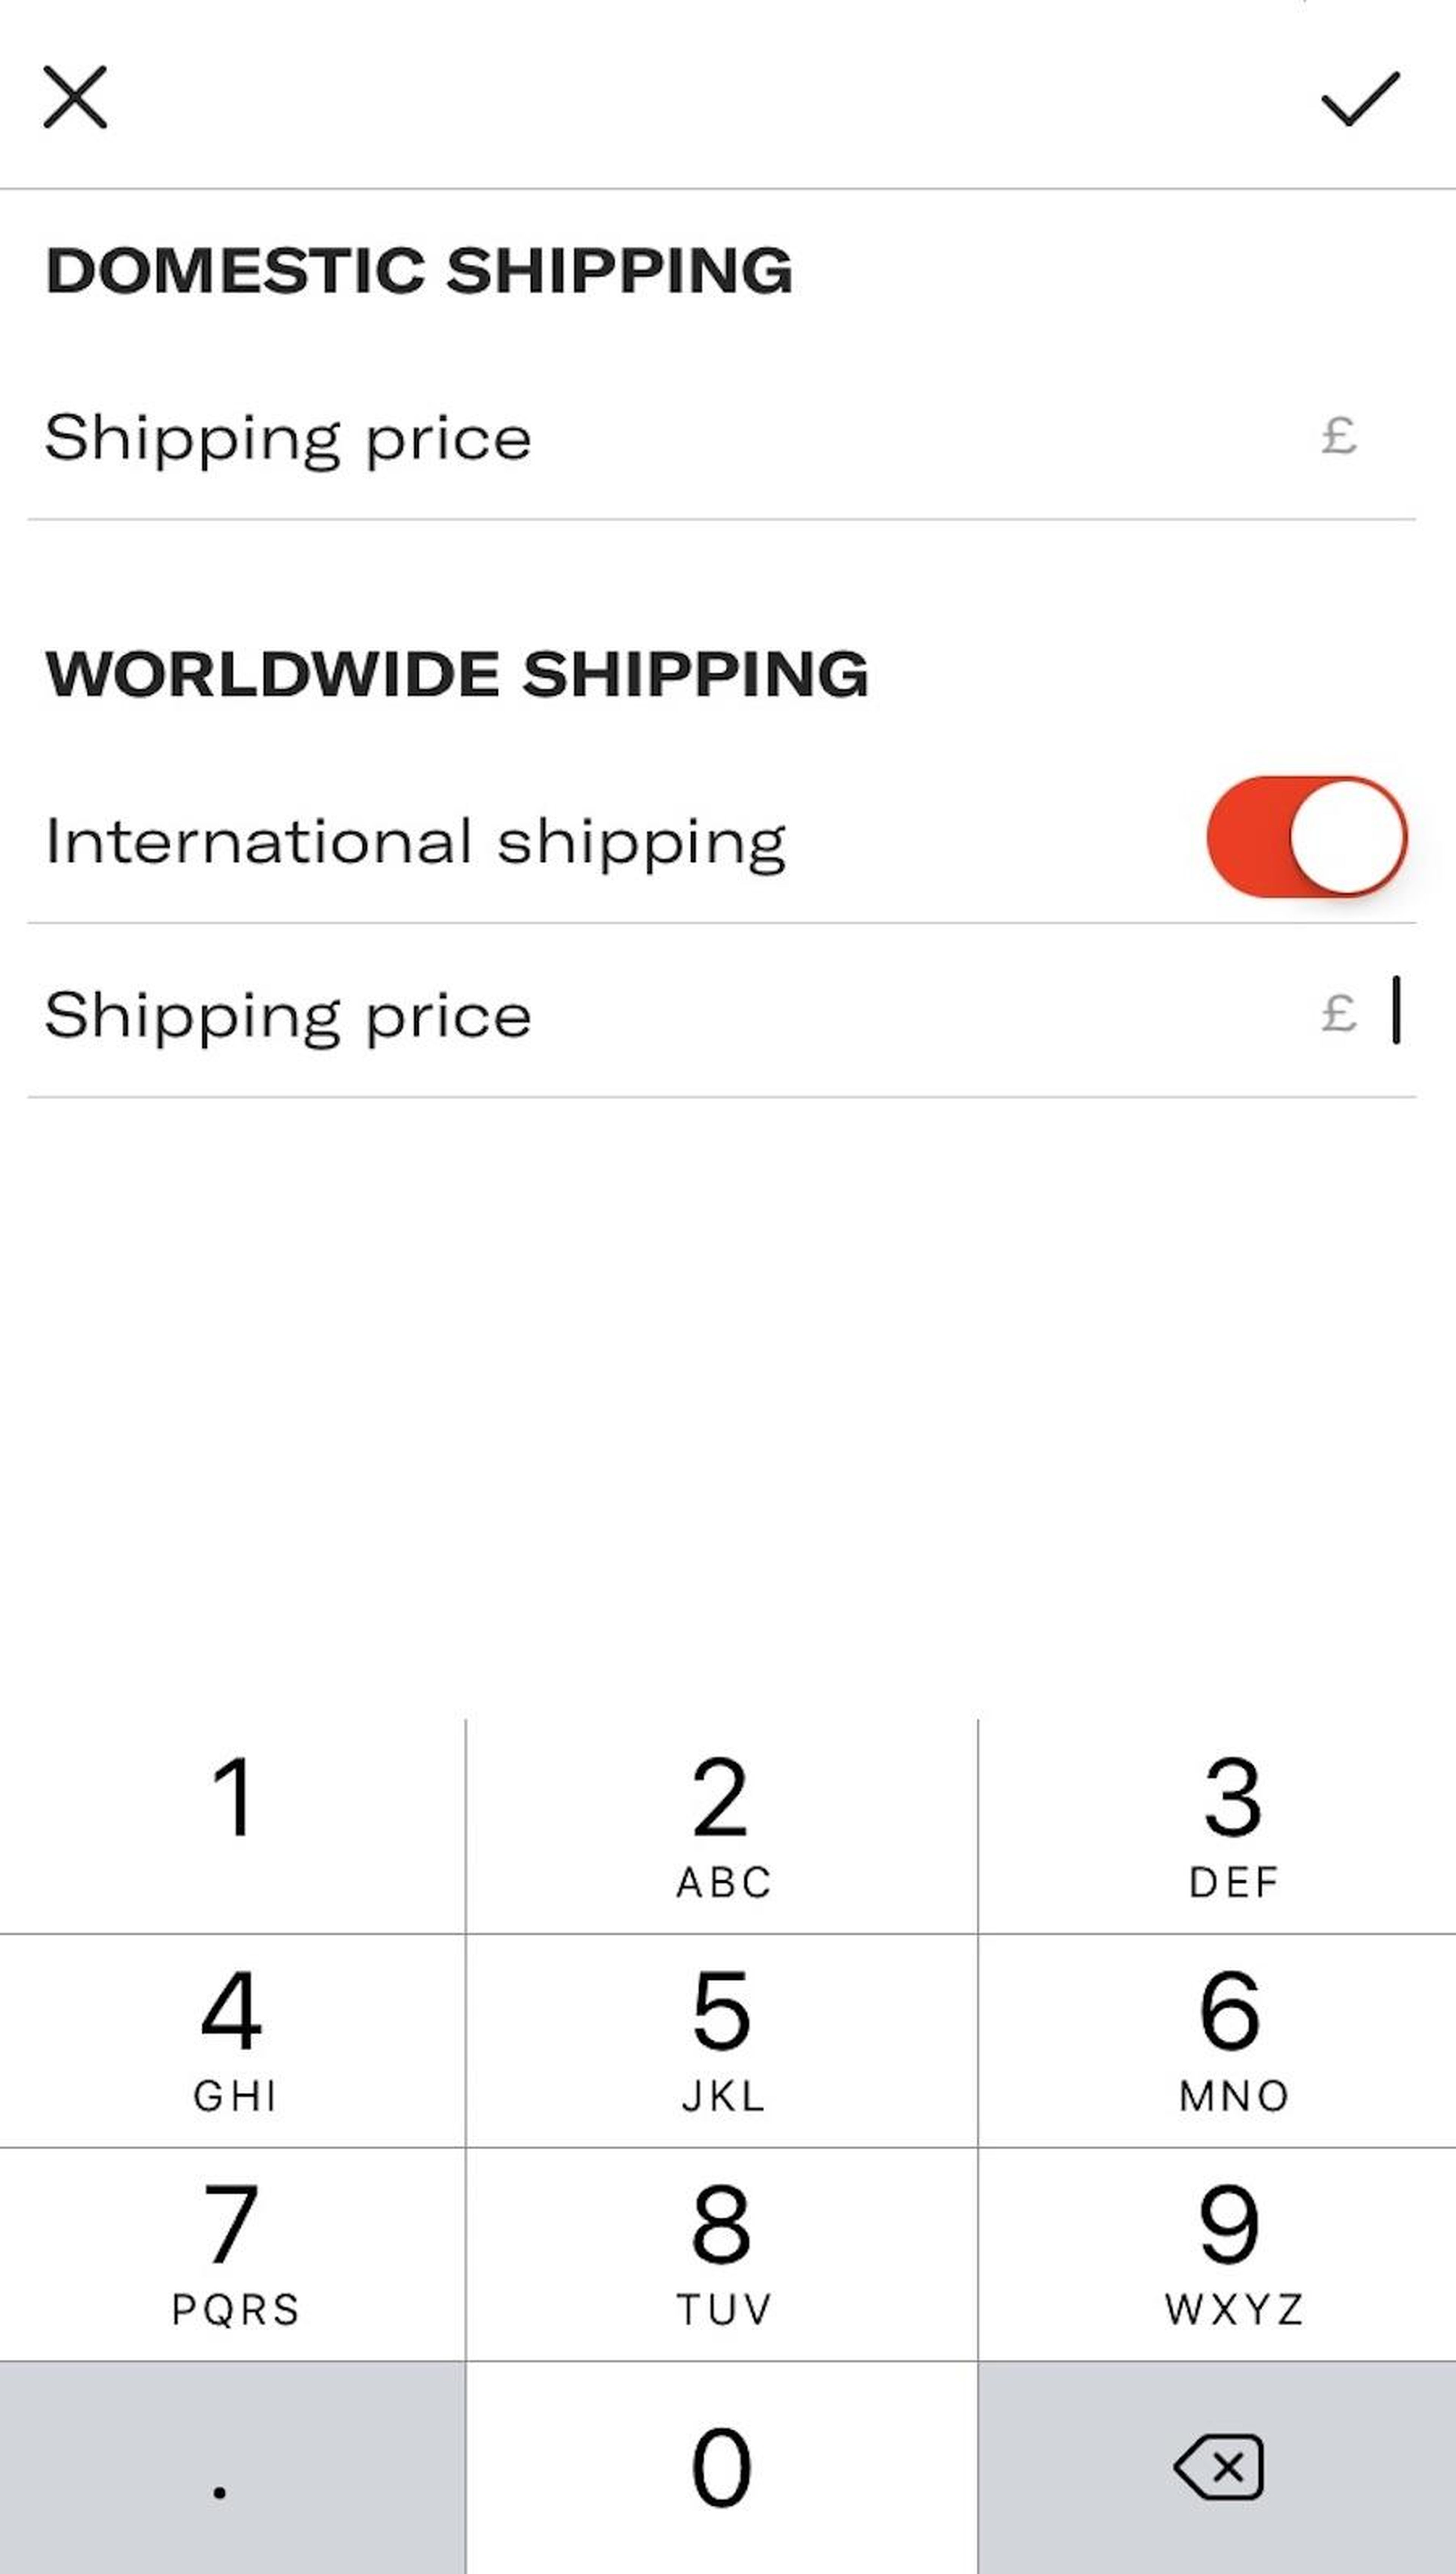 At this point, you're also asked to set the shipping costs and decide whether you are prepared to ship the item internationally, which is usually more expensive.